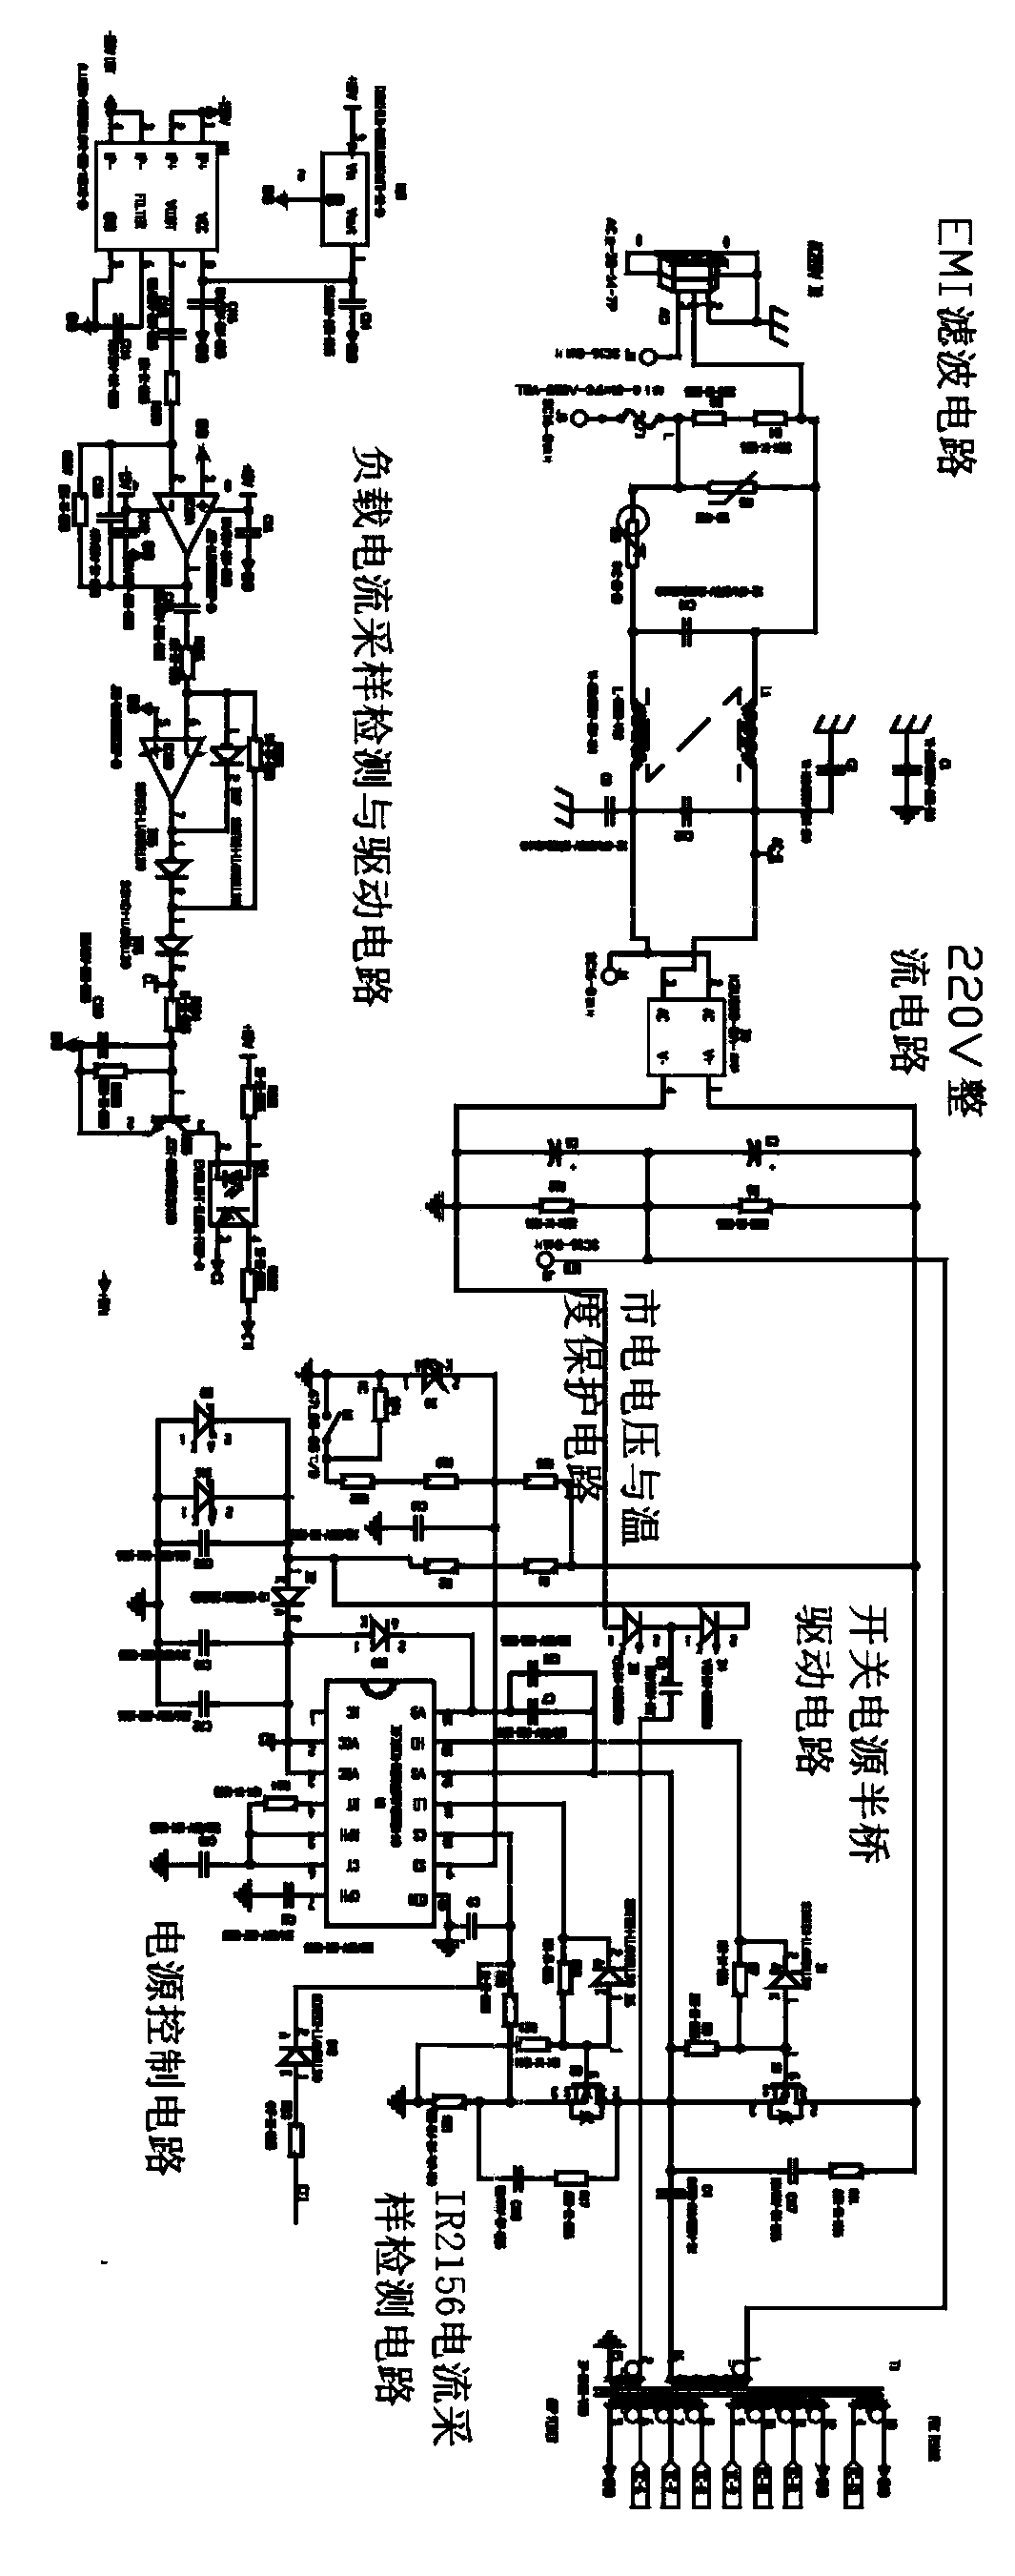 A switching power supply and audio system based on IR2156